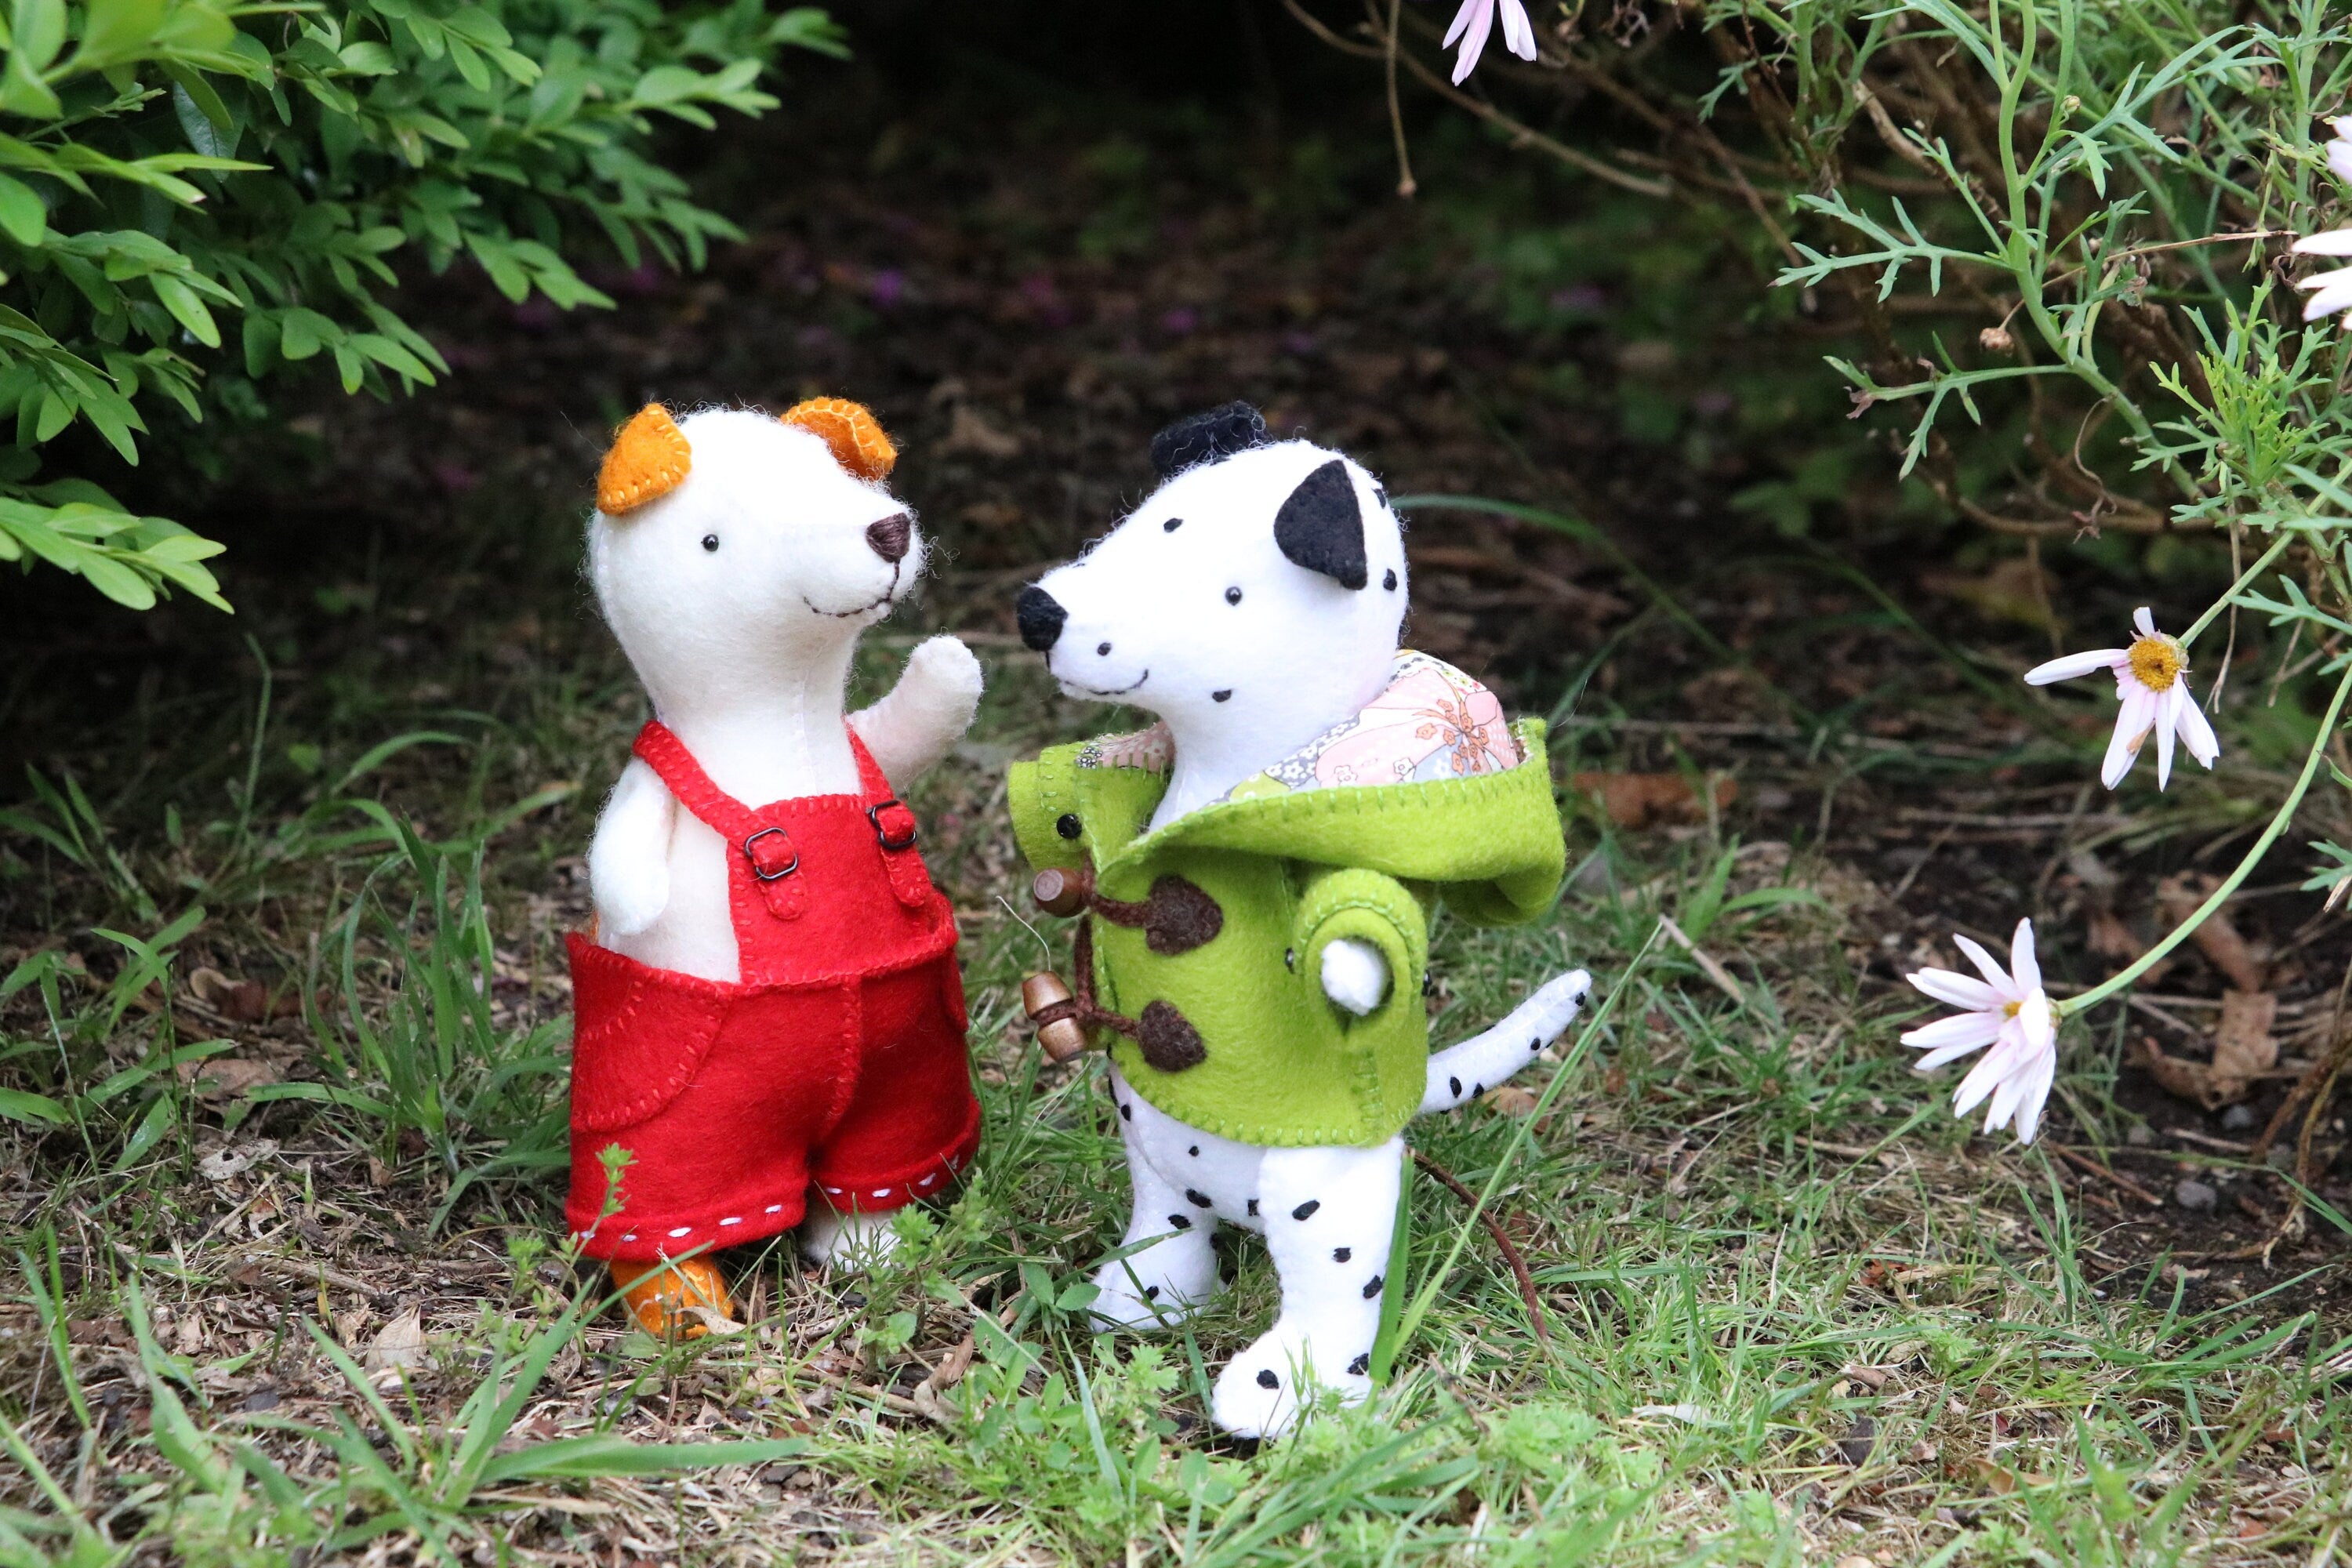 two small felt dog toys standing in a garden